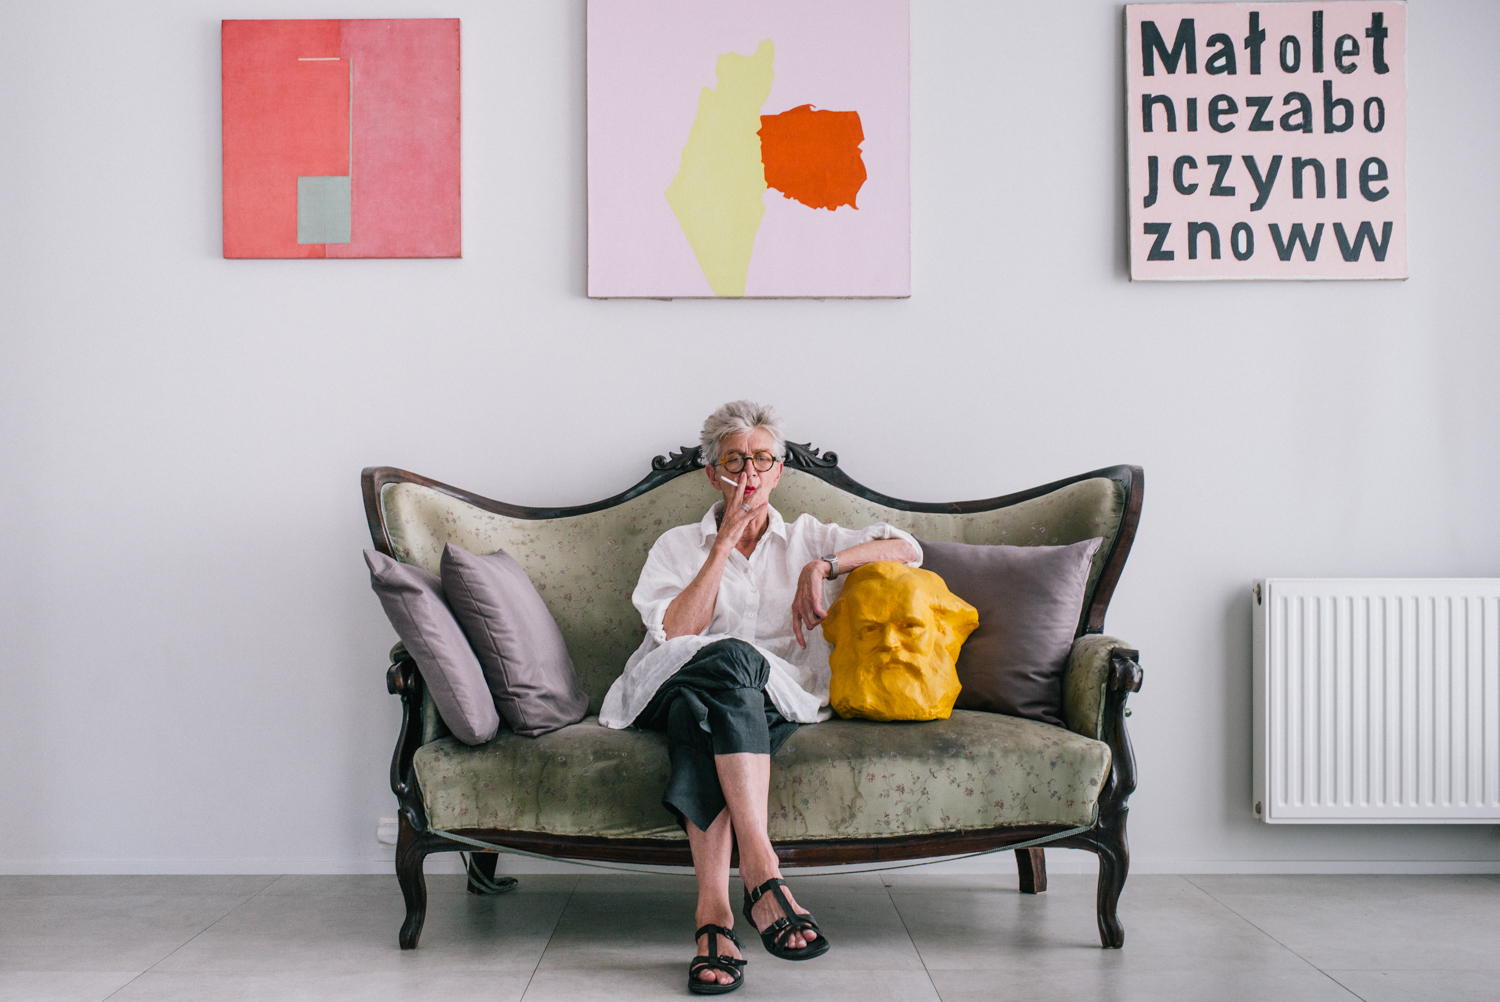  Anda Rottenberg is a Polish art historian, art critic, writer, former director of the Zachęta National Gallery of Art in Warsaw and member of the International Association of Art Critics (AICA), International "Manifesta" Foundation and the Internati